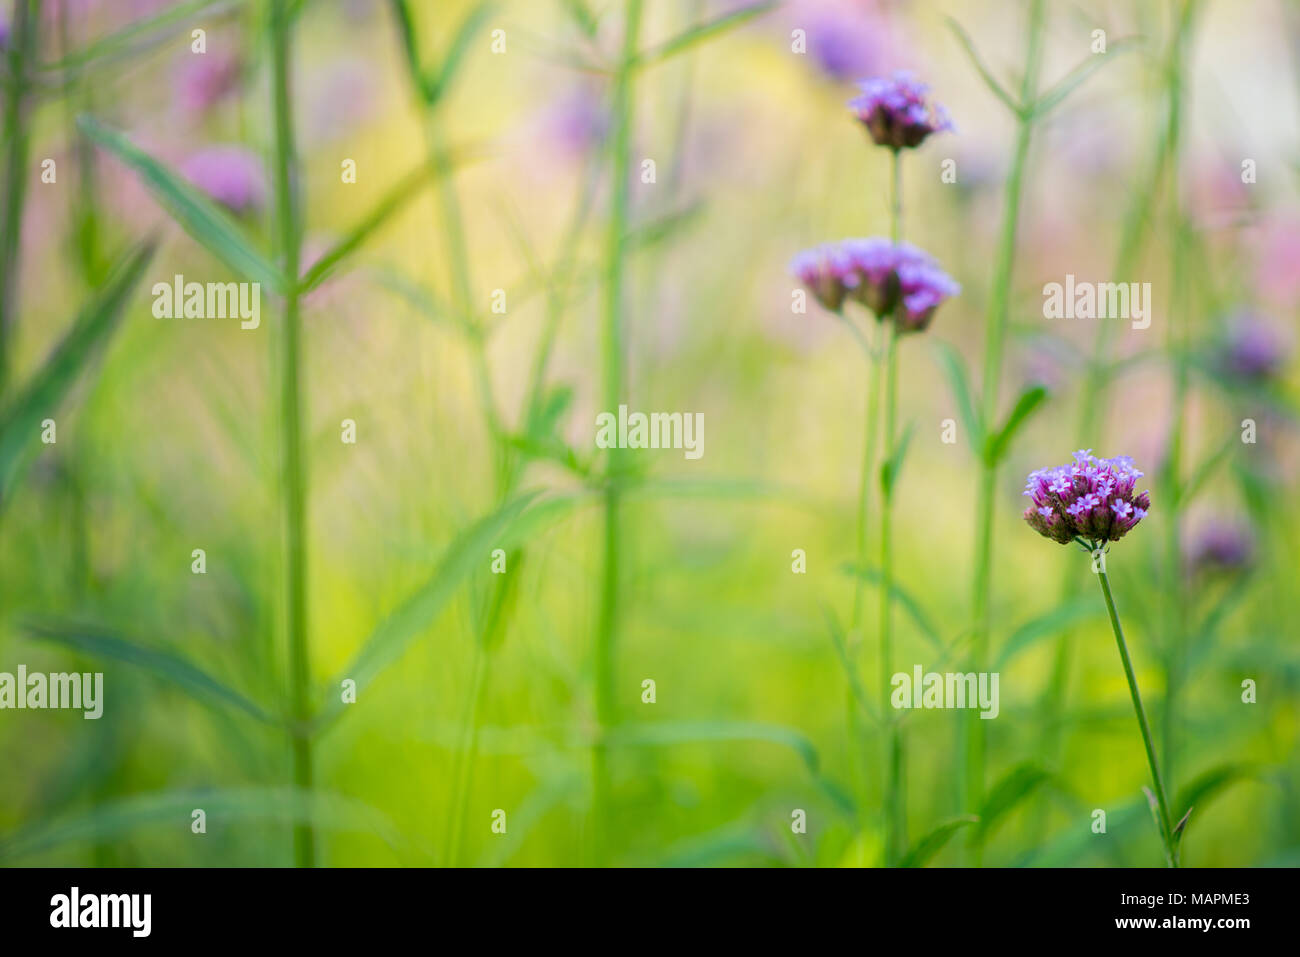 Summer flower background in watercolor style. Leaves & stalks with purple spots of verbena flowers all blurred in bokeh. Only twig on right is sharp Stock Photo